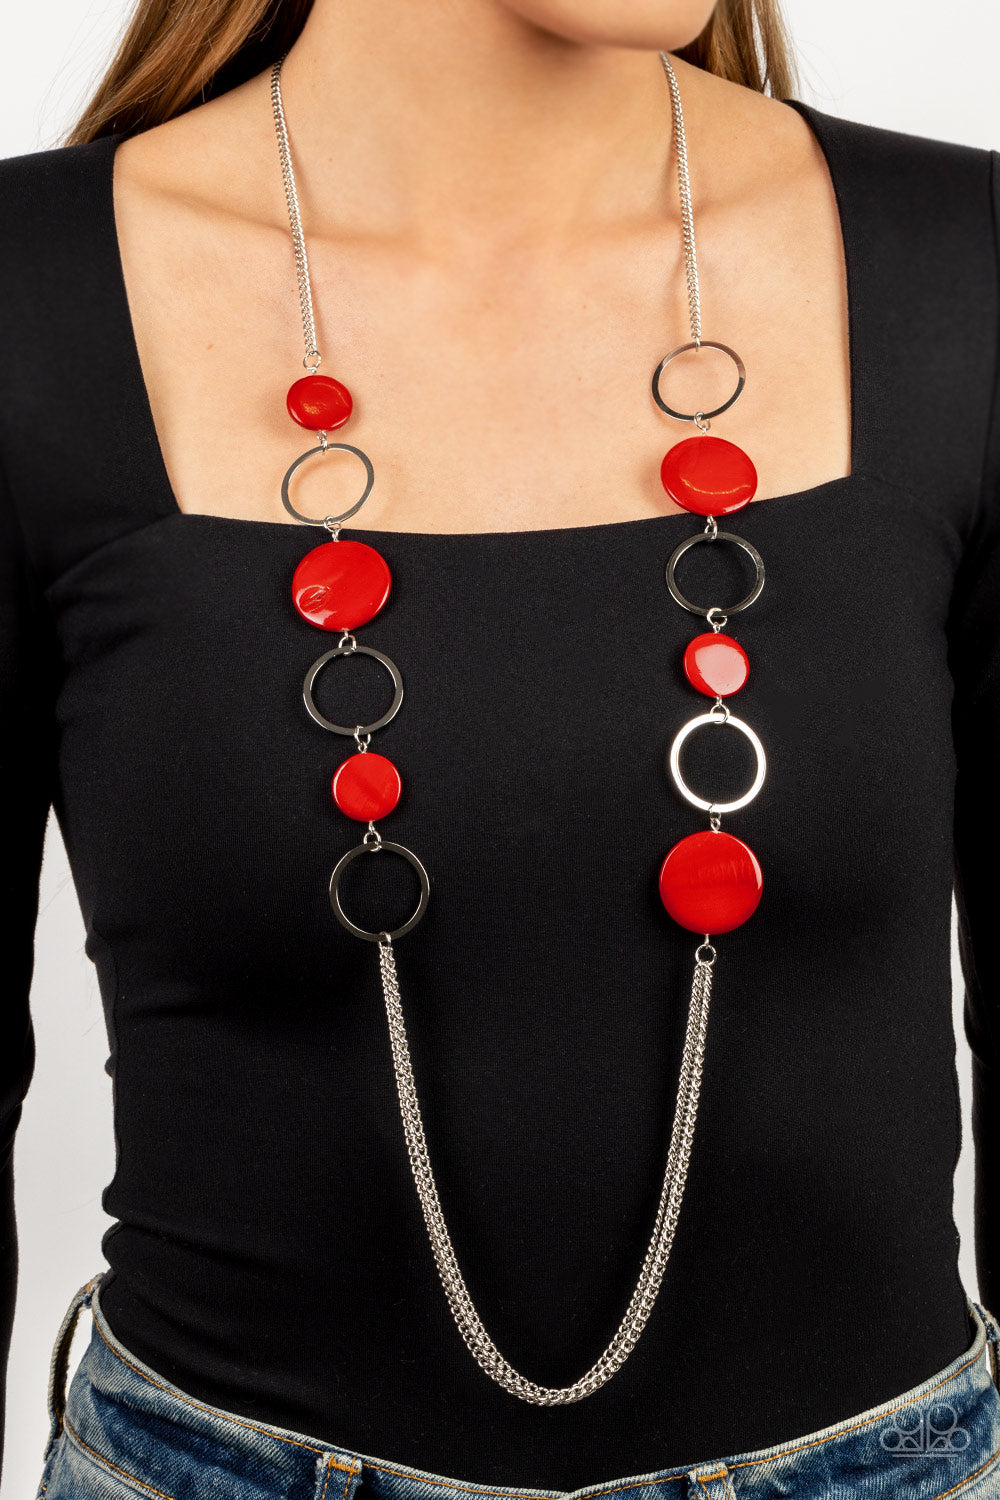 Beach Hub Paparazzi Accessories Necklace with Earrings Red